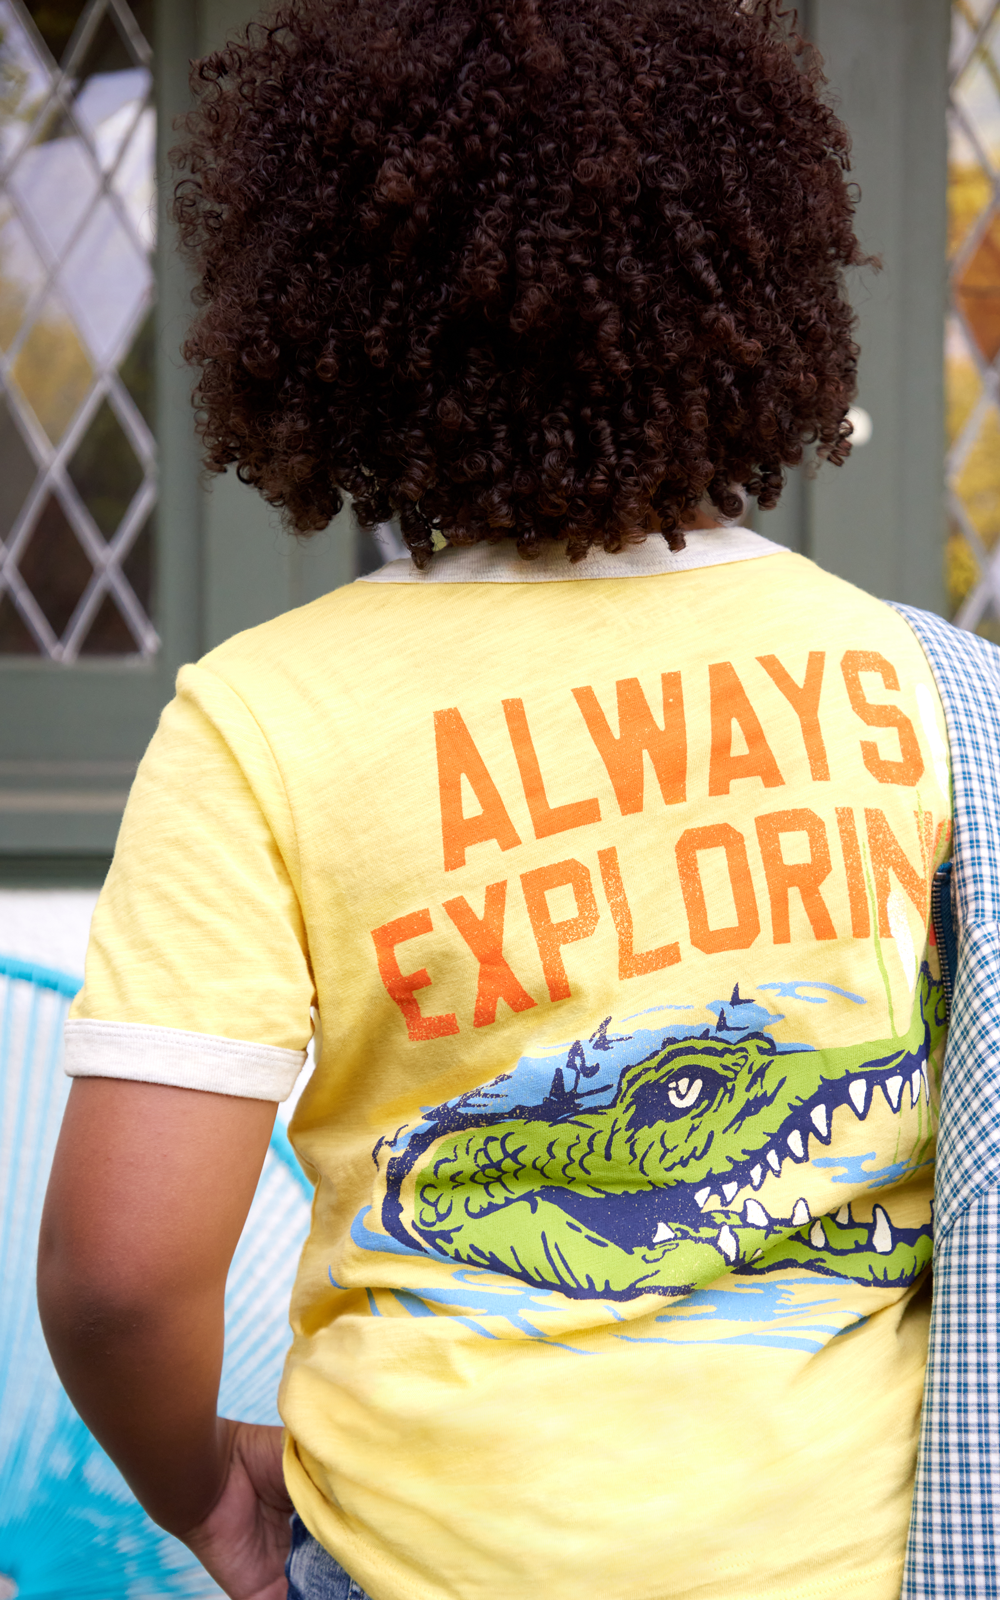 BACK VIEW OF KID WEARING YELLOW T-SHIRT WITH "ALWAYS EXPLORING"